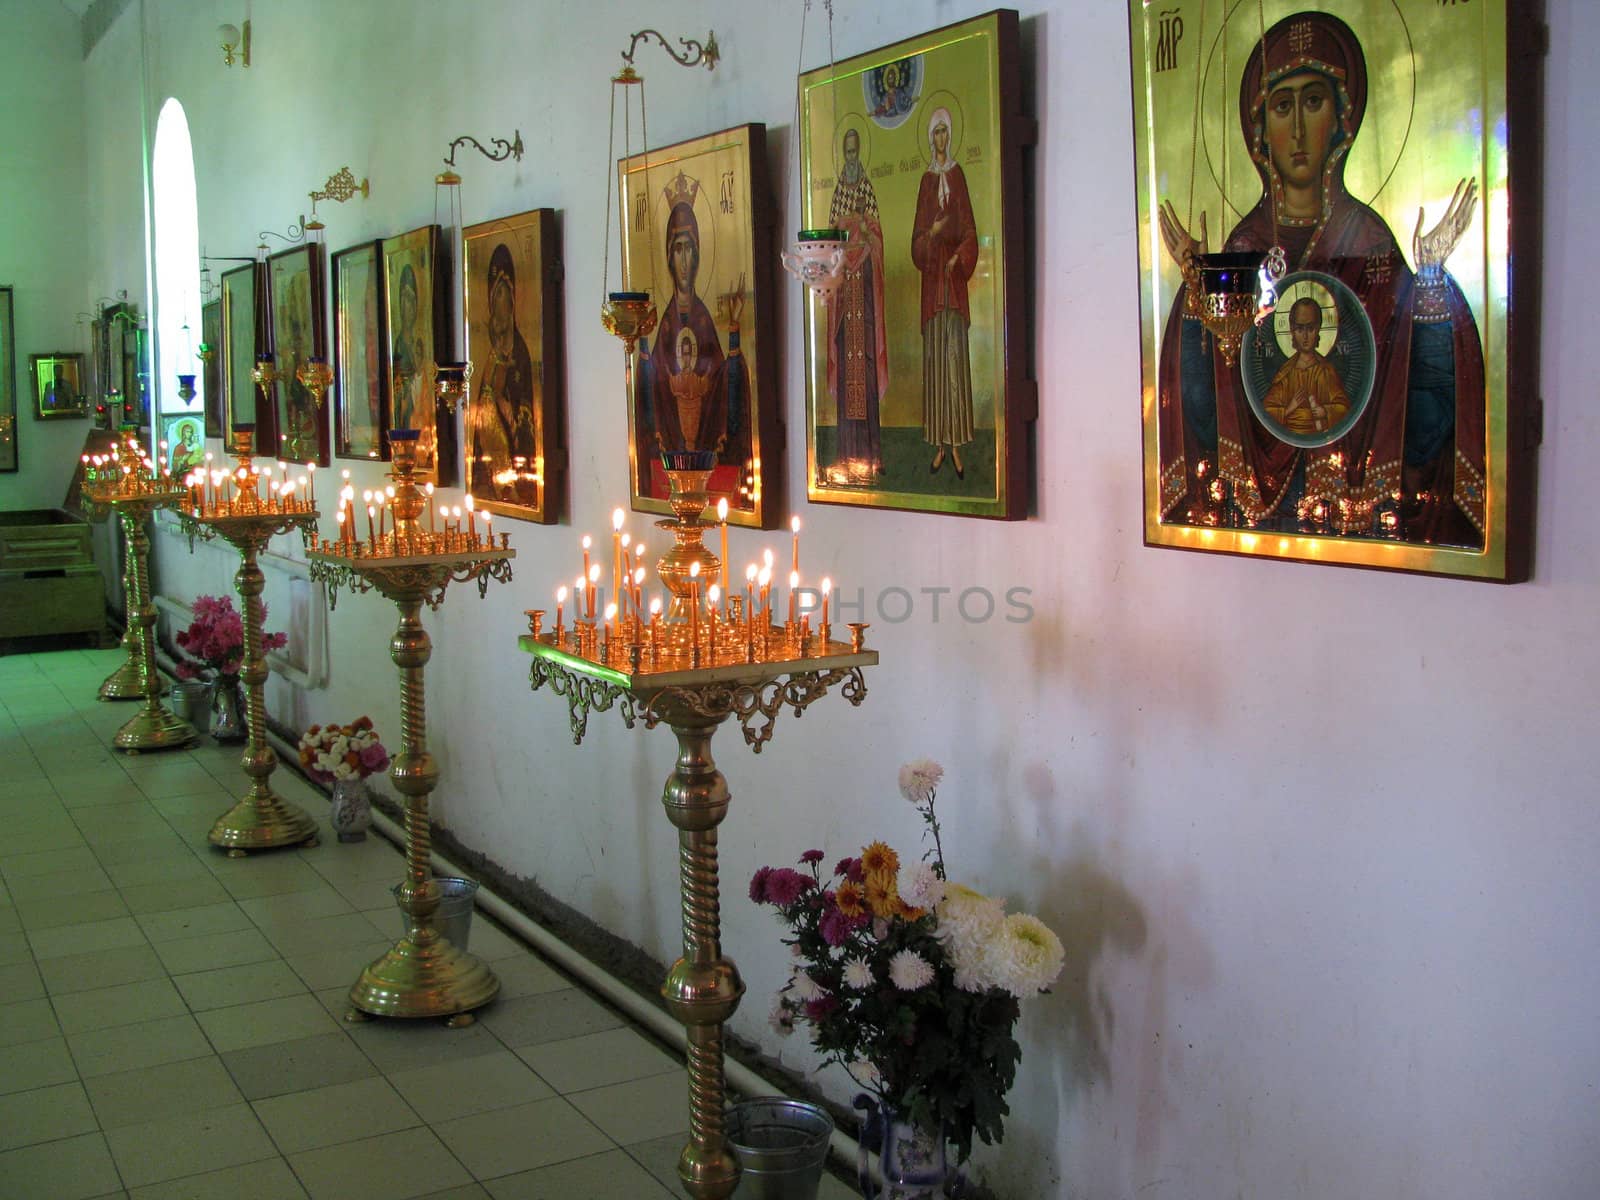 Temple, icons, Gosh mother, church; candles, image, fire, Easter, Christianity, pilgrimage, saint place; priory; religion; faith